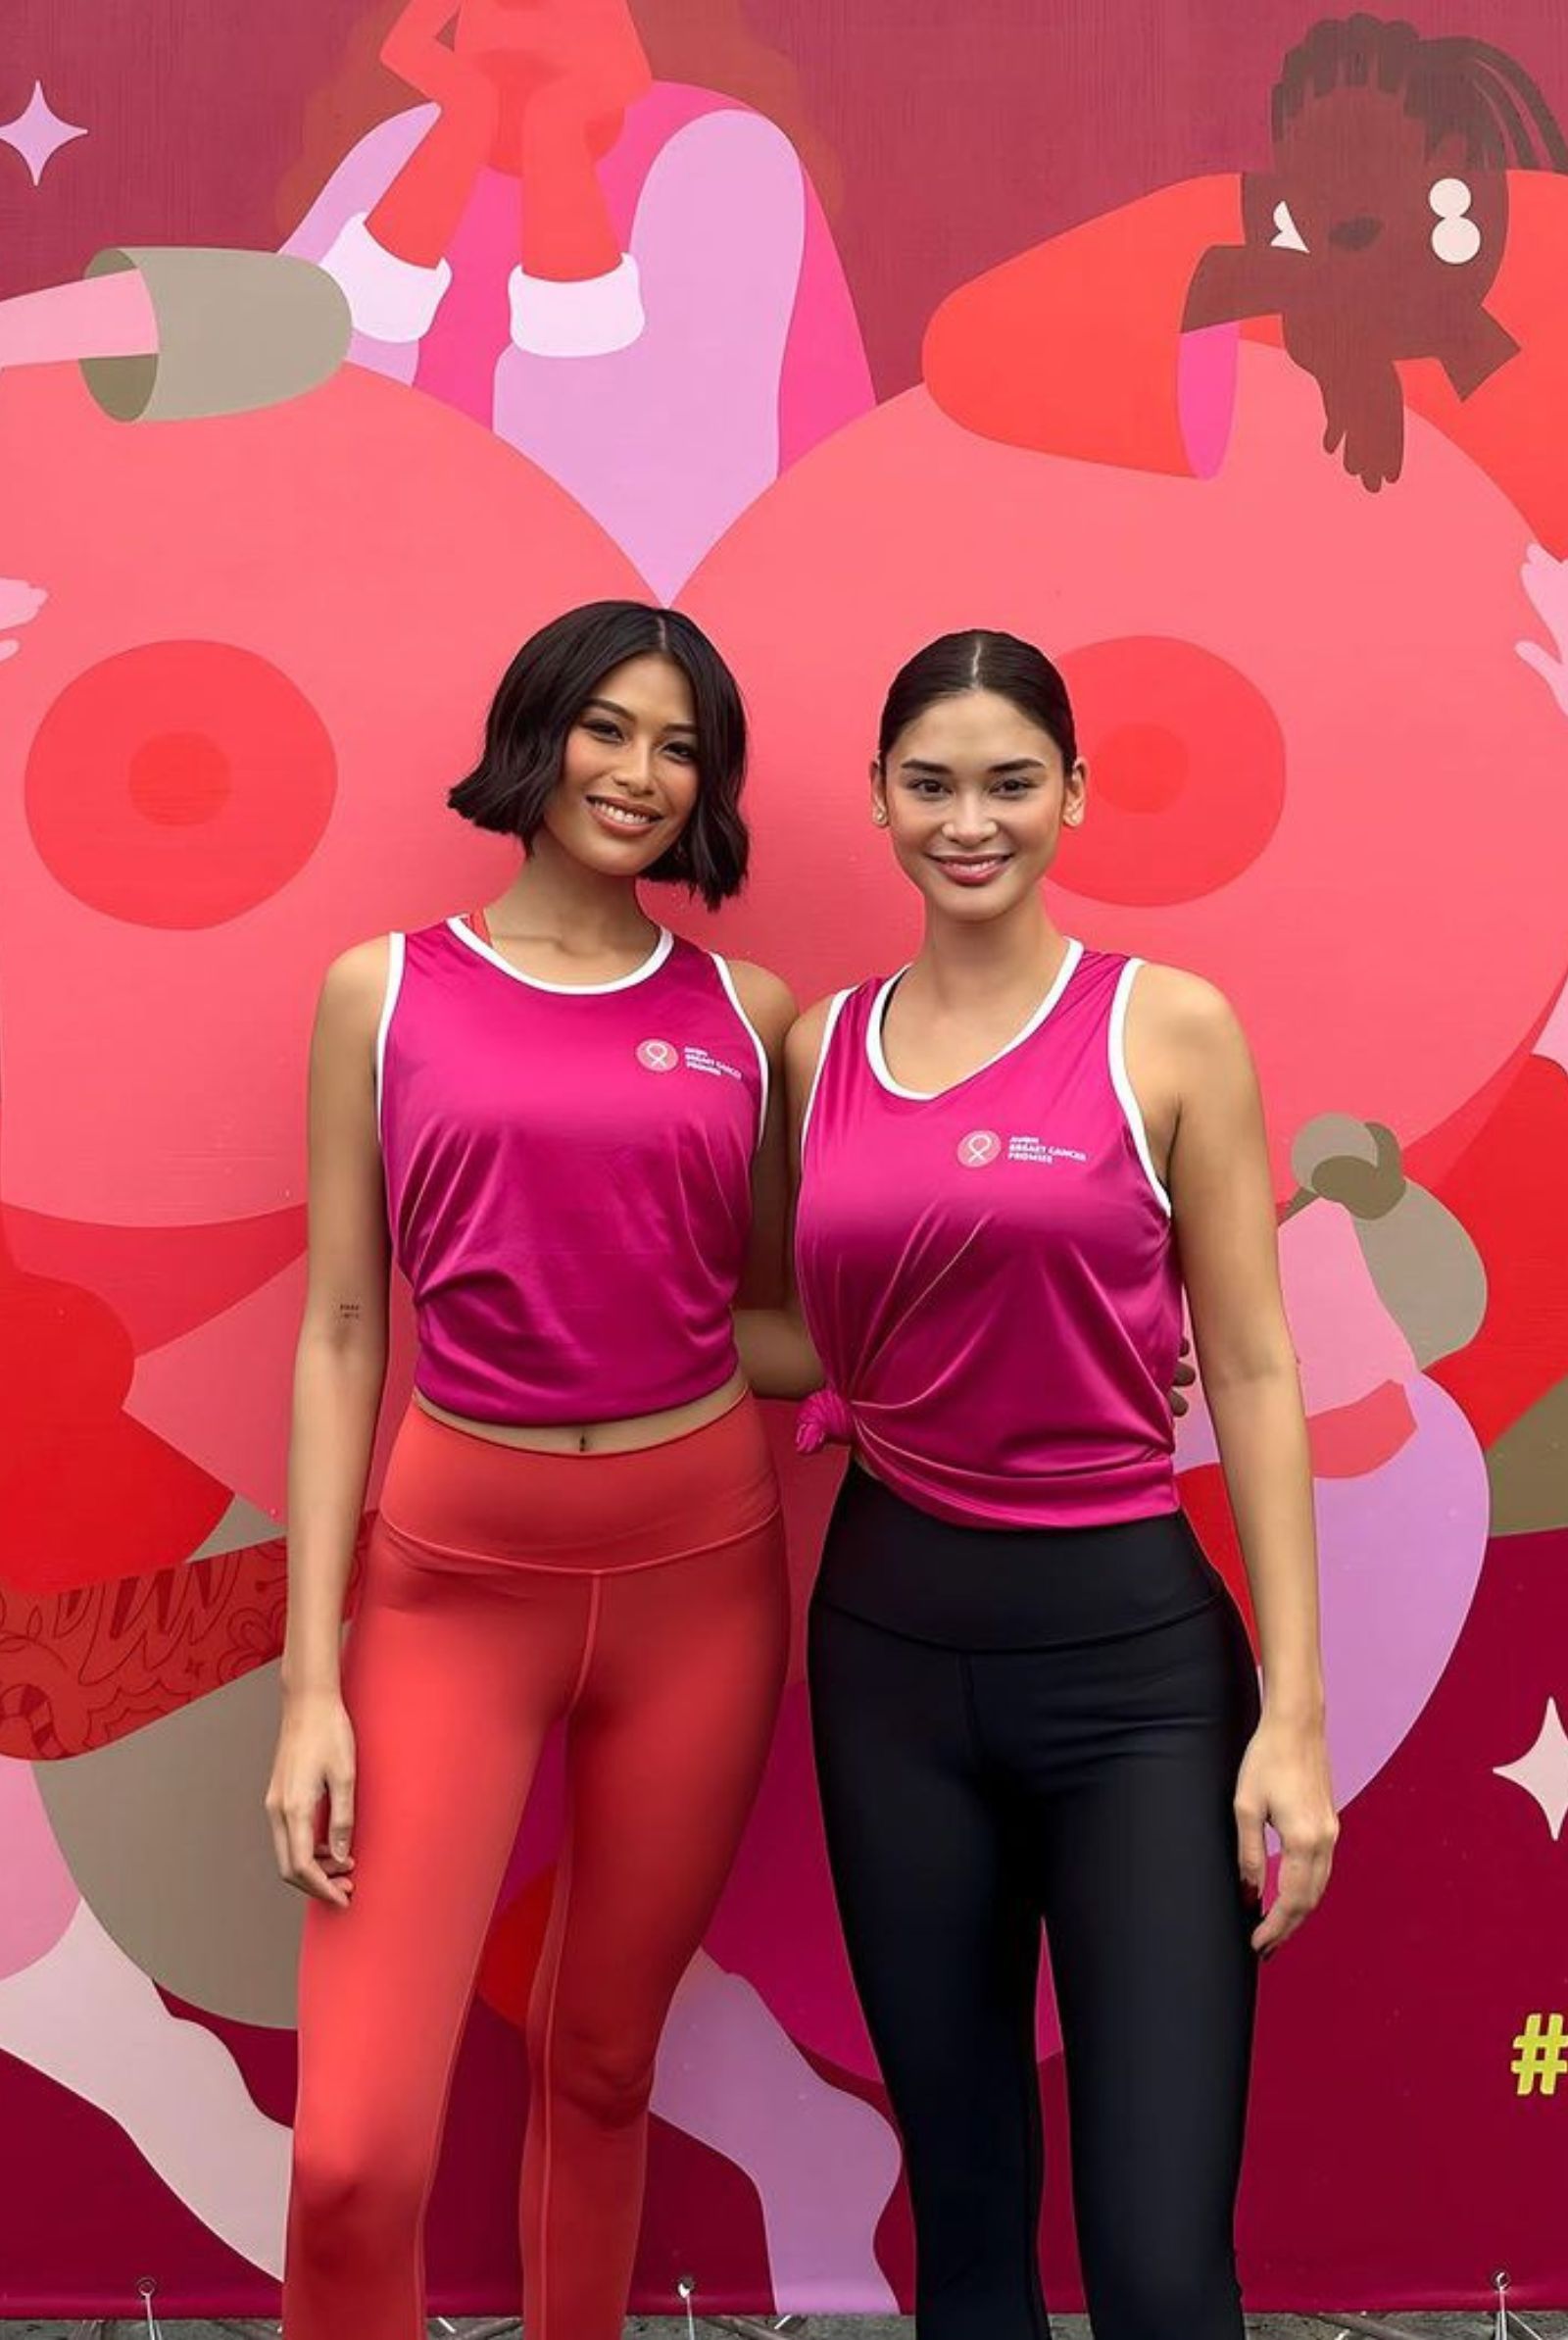 Michelle Dee opens up about her friendship with Pia Wurtzbach